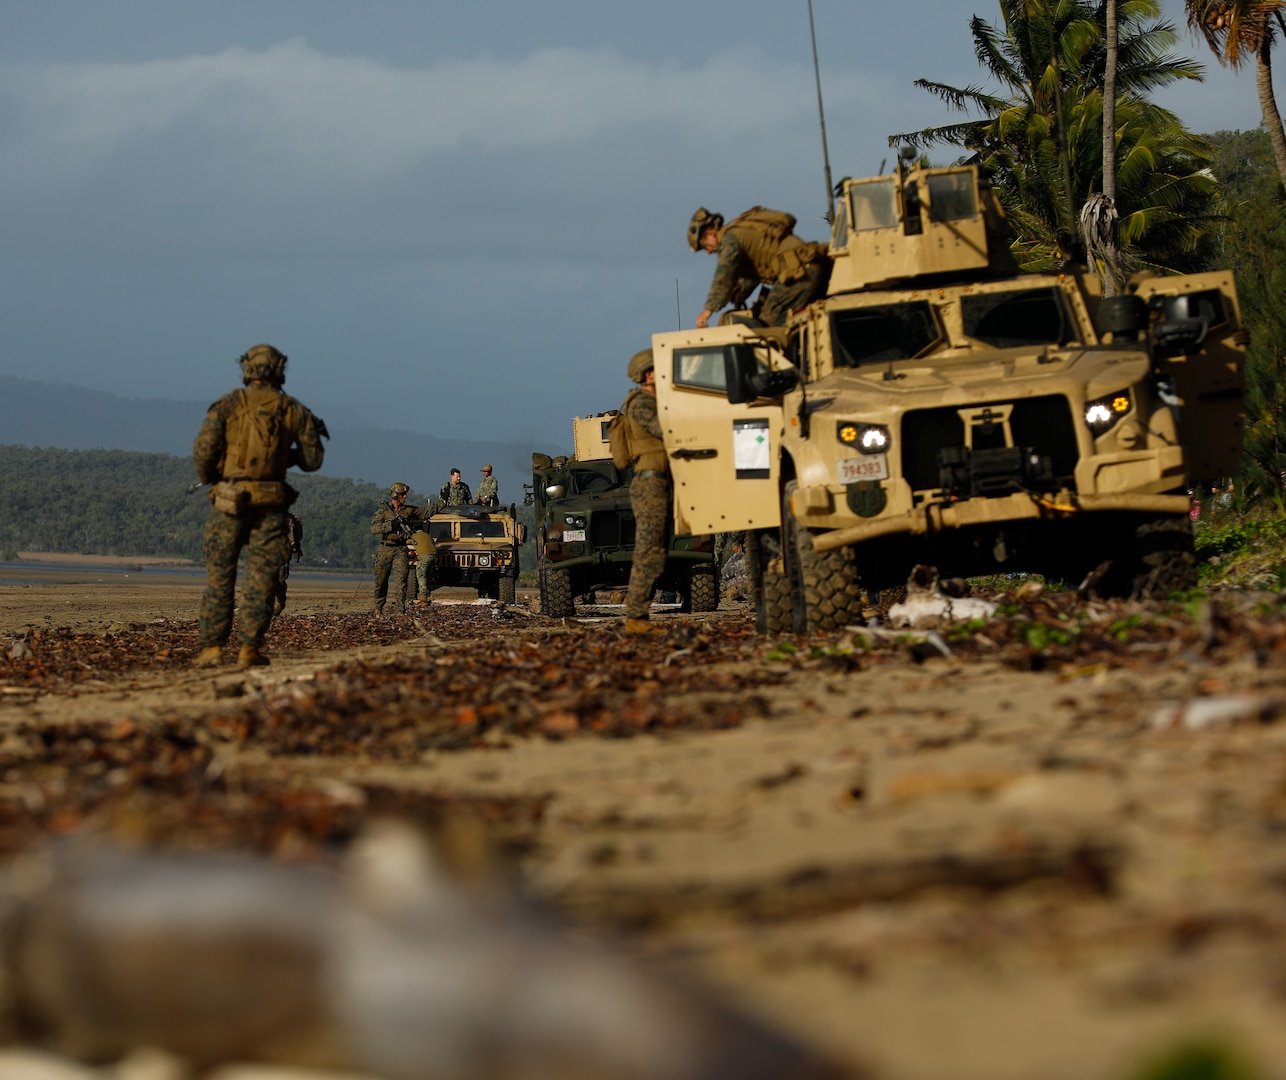 Marines from the 31st Marine Expeditionary Unit offload Joint Light Tactical Vehicles as part of Talisman Sabre 23 at Midge Point, Australia, July 25, 2023. As the stand-in force operating within the first island chain of the Indo-Pacific, the Marine Corps trains to fight in a distributed maritime environment where sensing, targeting, and long-range precision fire capabilities are established to support naval operations at sea. (U.S. Army Photo by Staff Sgt. Jessica Elbouab)